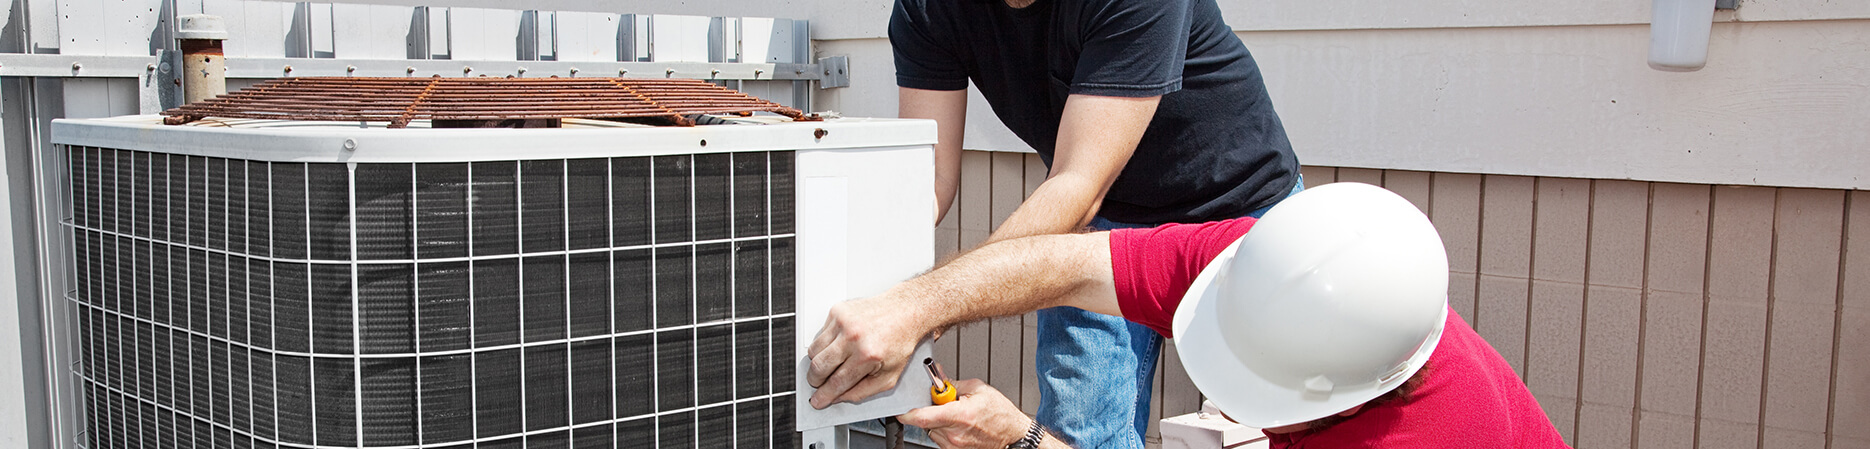 Laguna Hills Air Conditioning Services, HVAC Contractor and Remodeling Contractor